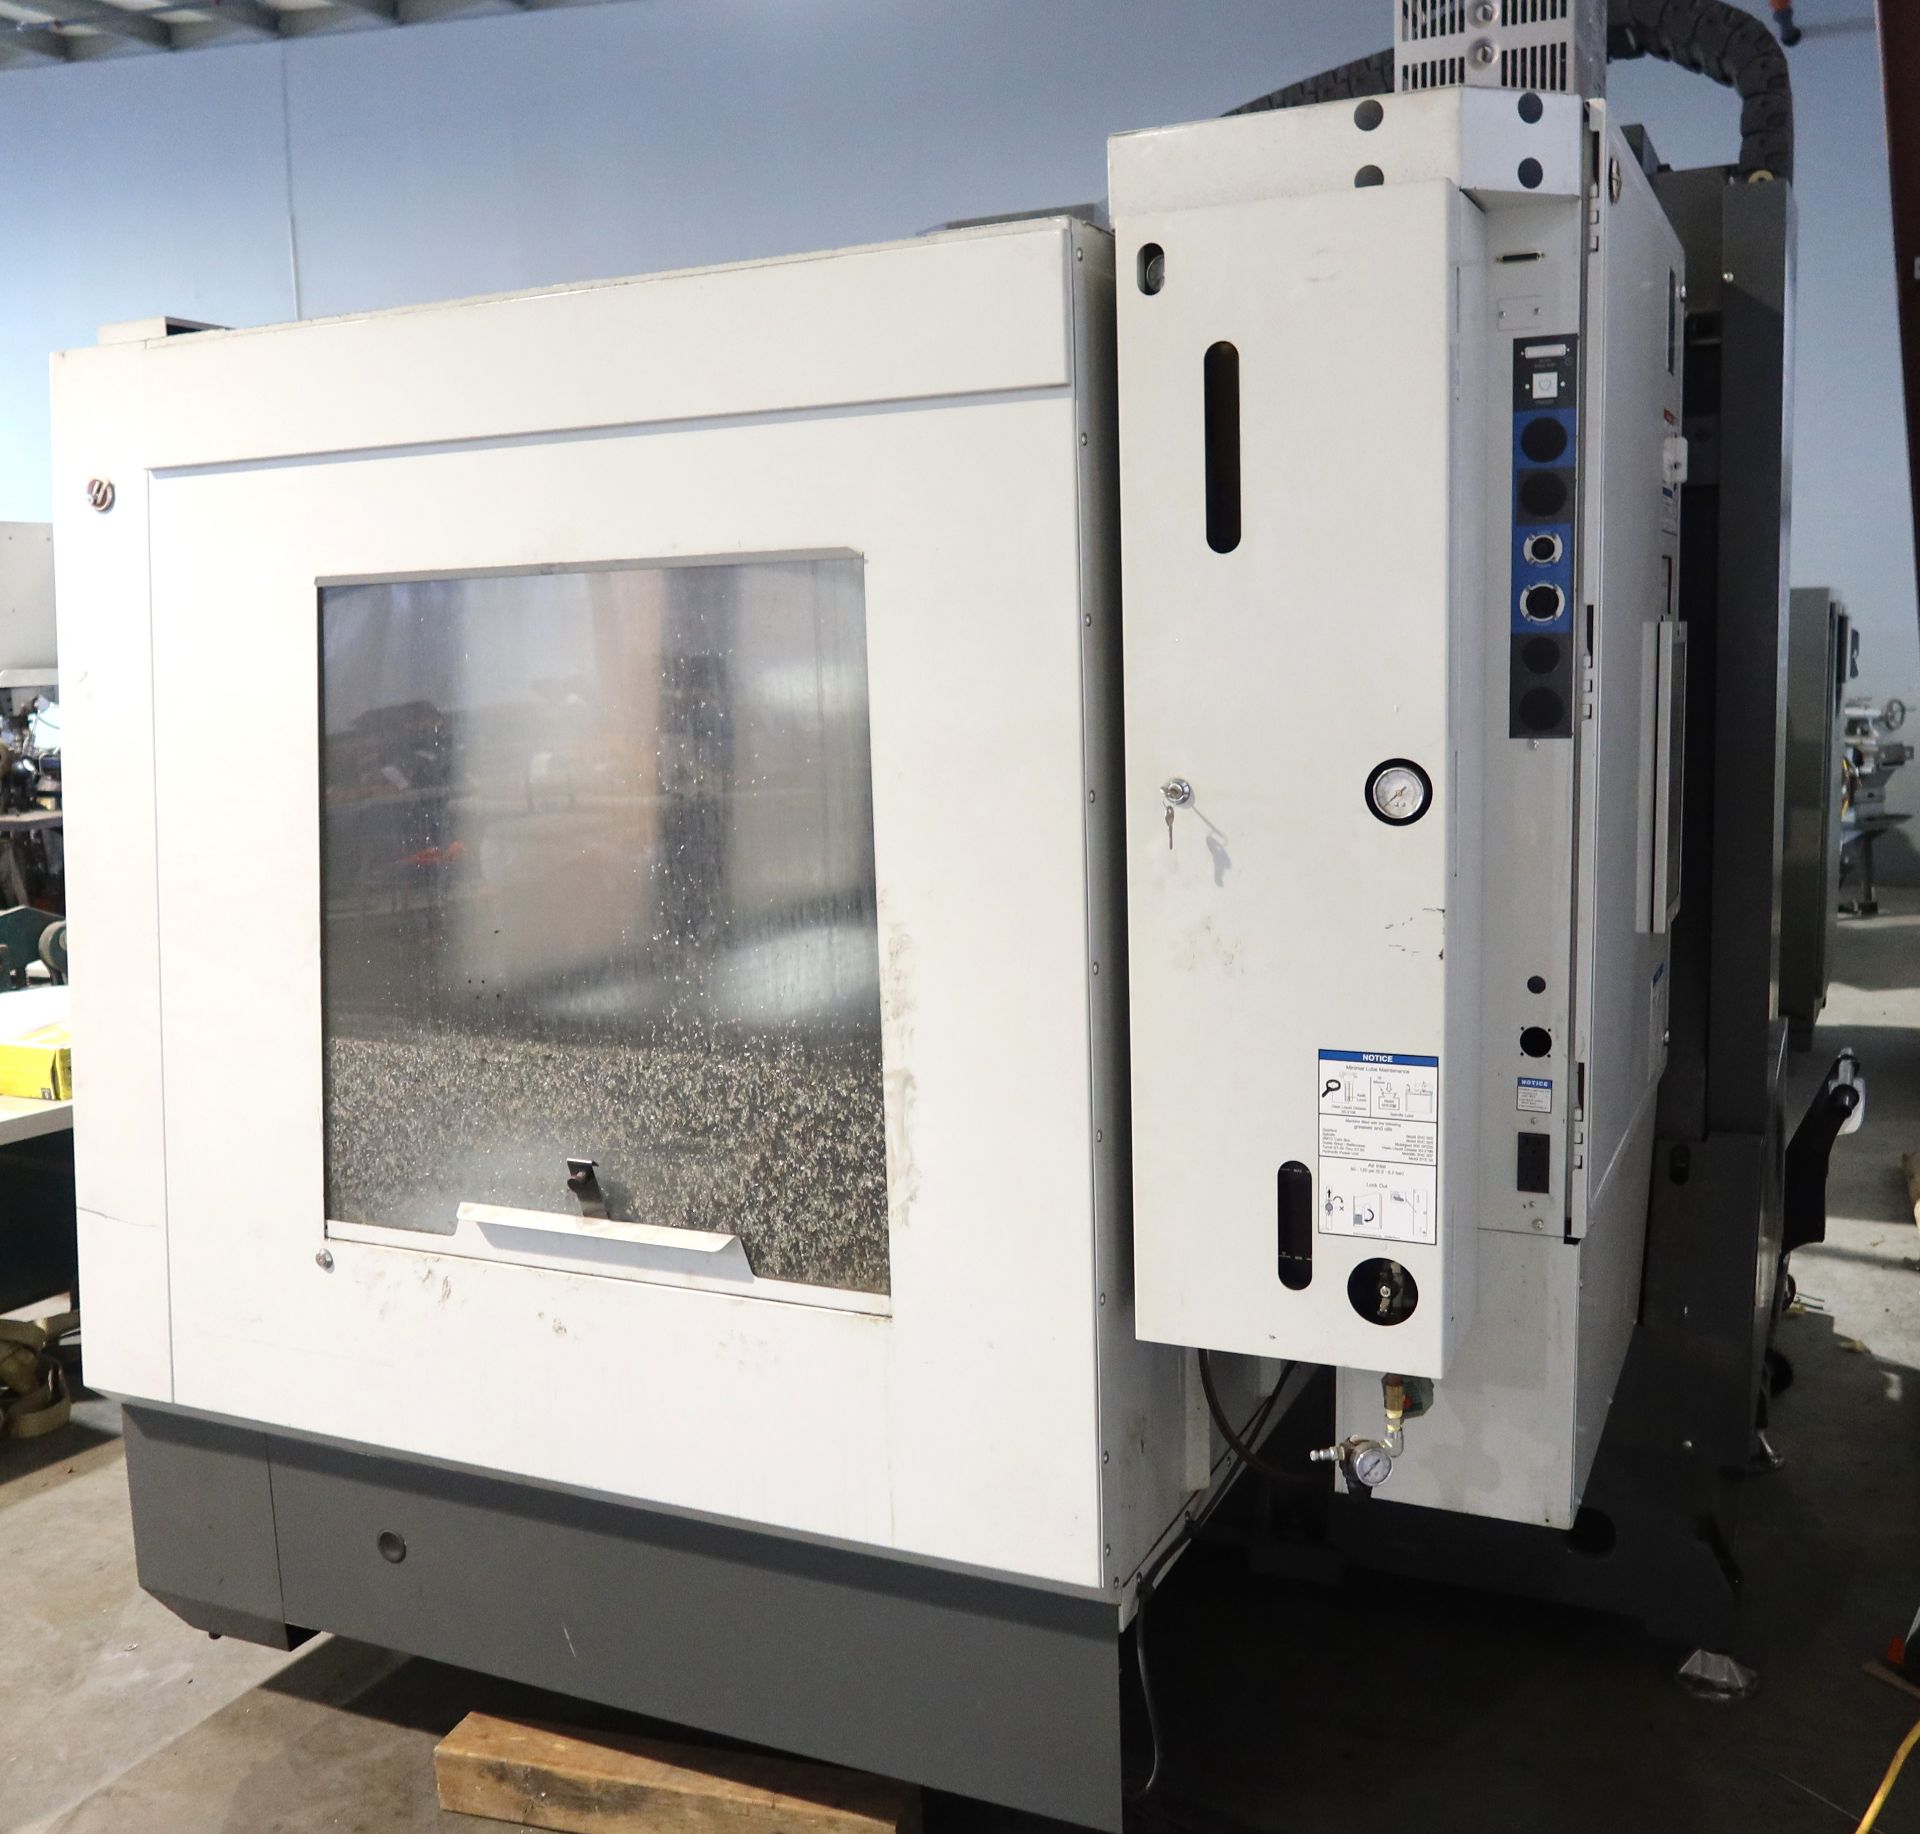 HAAS VF3-YT CNC 4-AXIS PRECISION VERTICAL MACHINING CENTER, S/N 1124918, NEW 2015 - Image 9 of 12